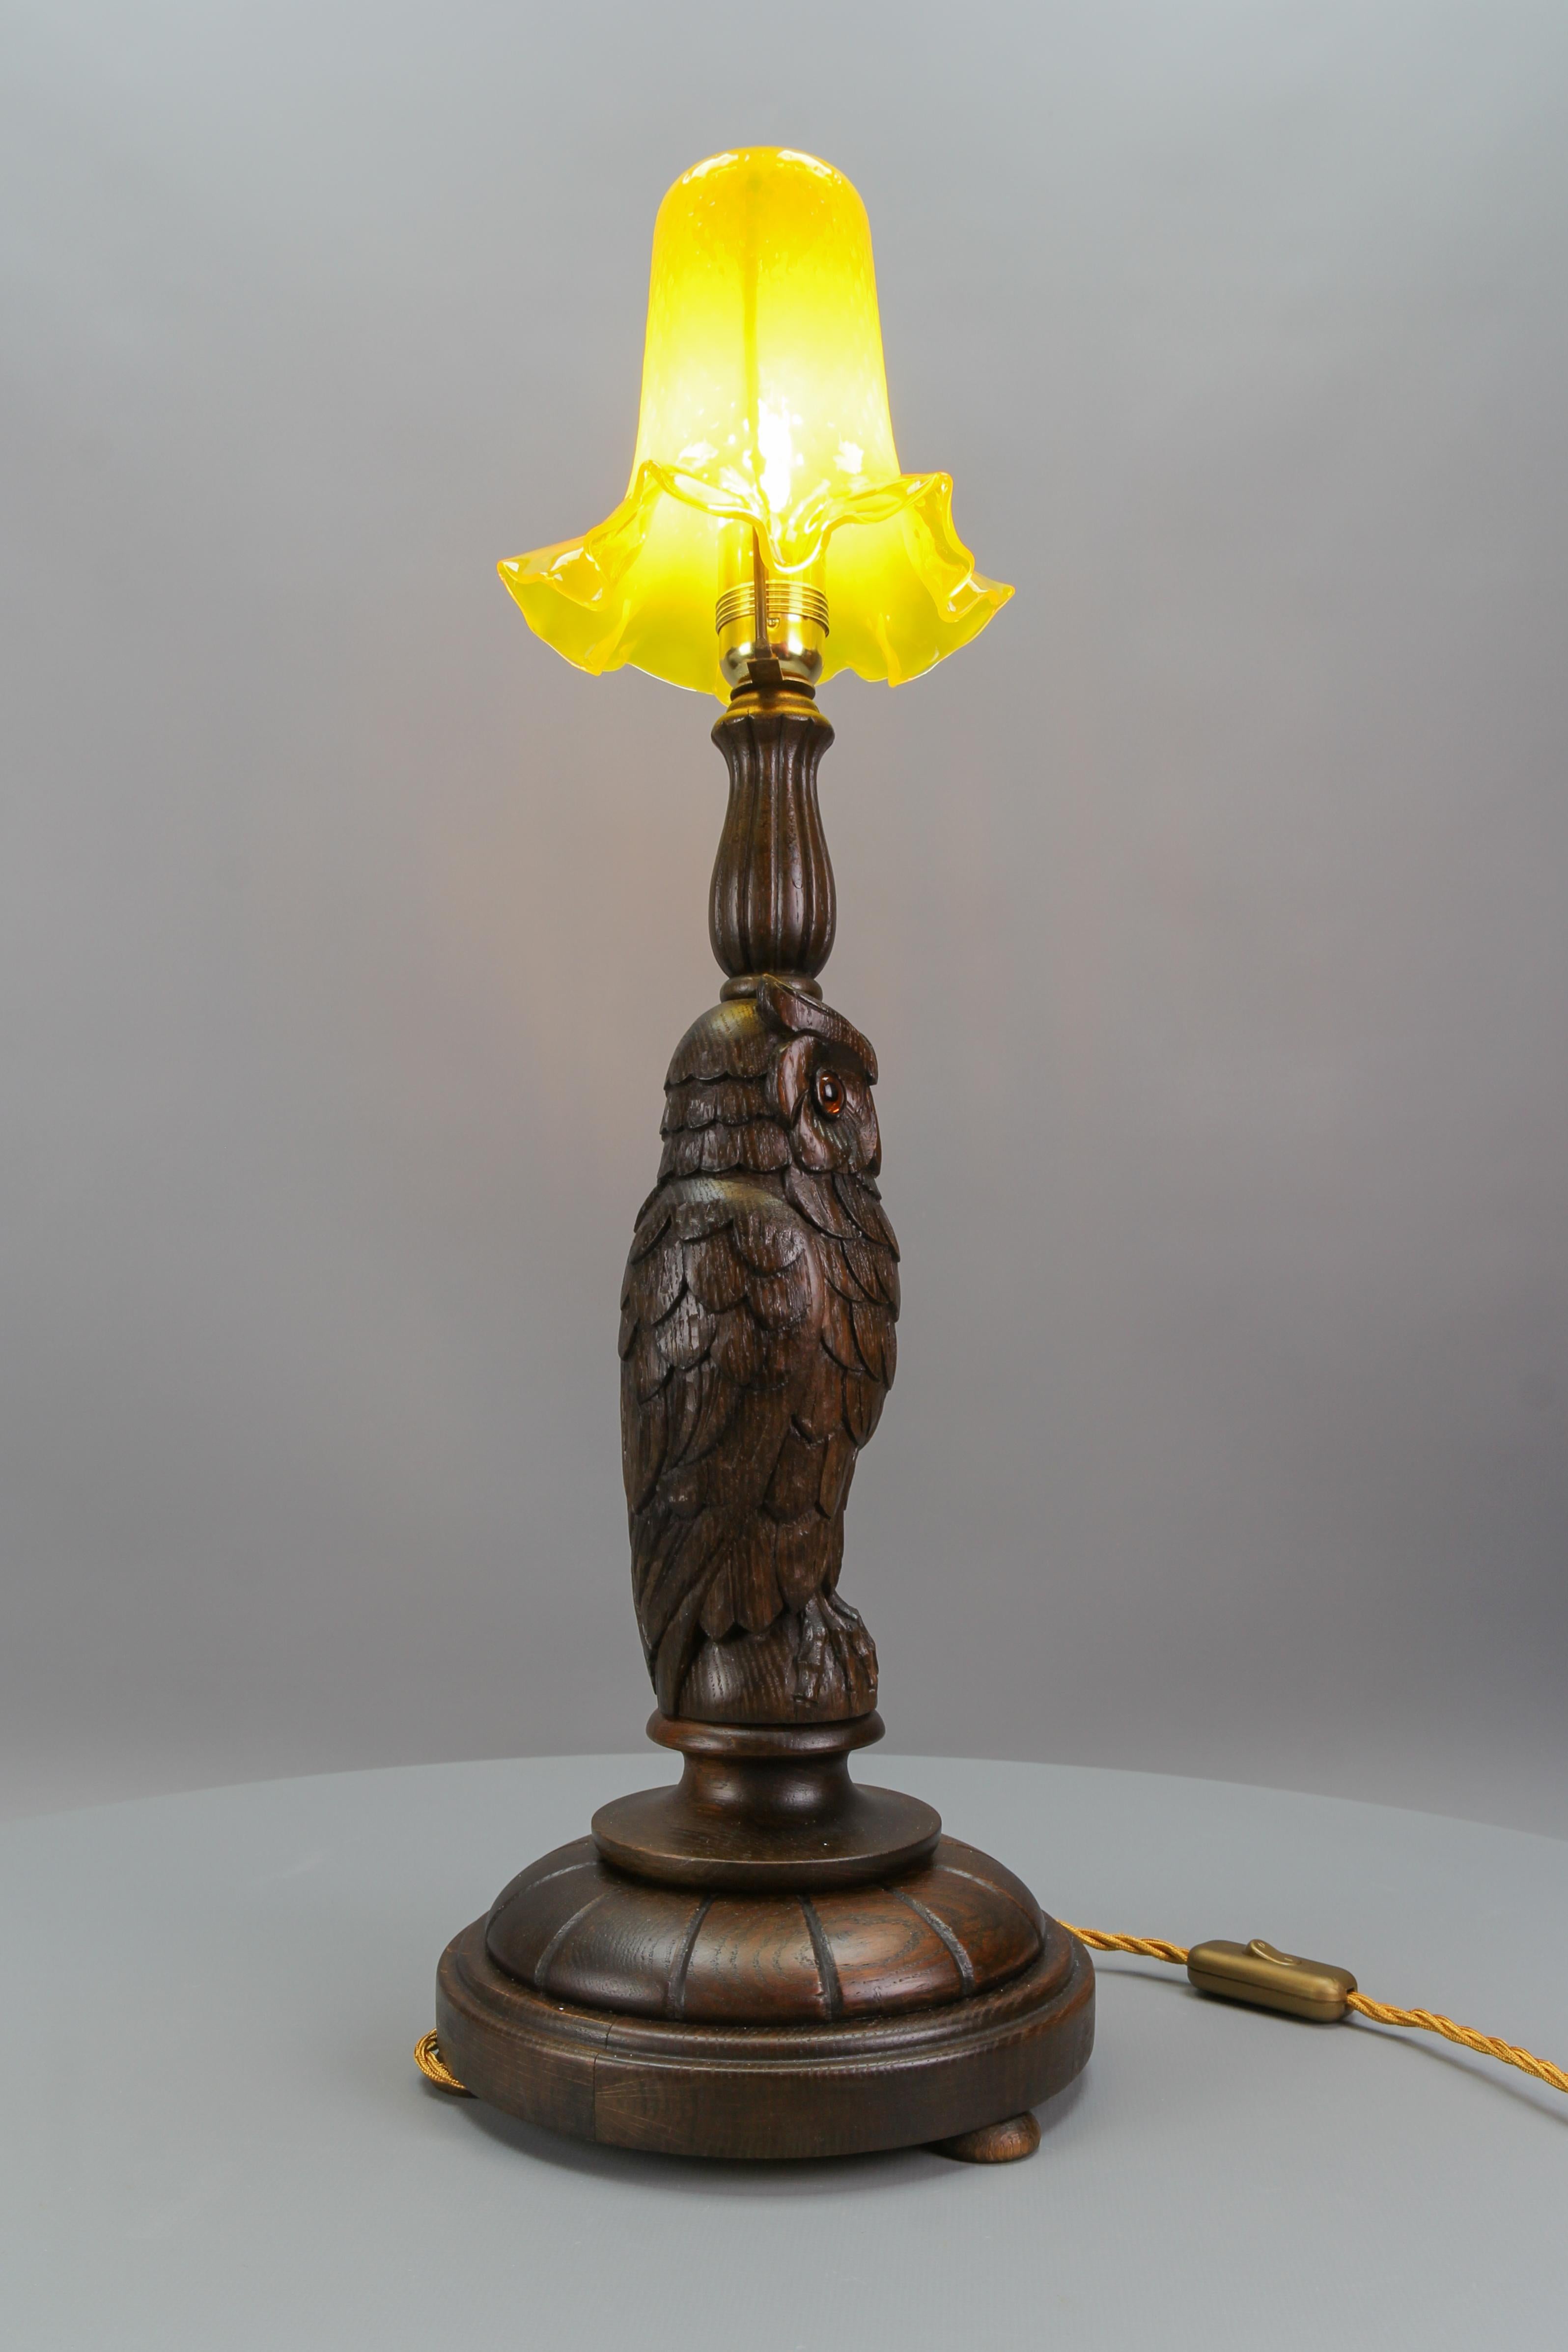 Metal Art Deco Table Lamp with Owl Sculpture and Yellow Glass Lampshade, ca. 1920 For Sale